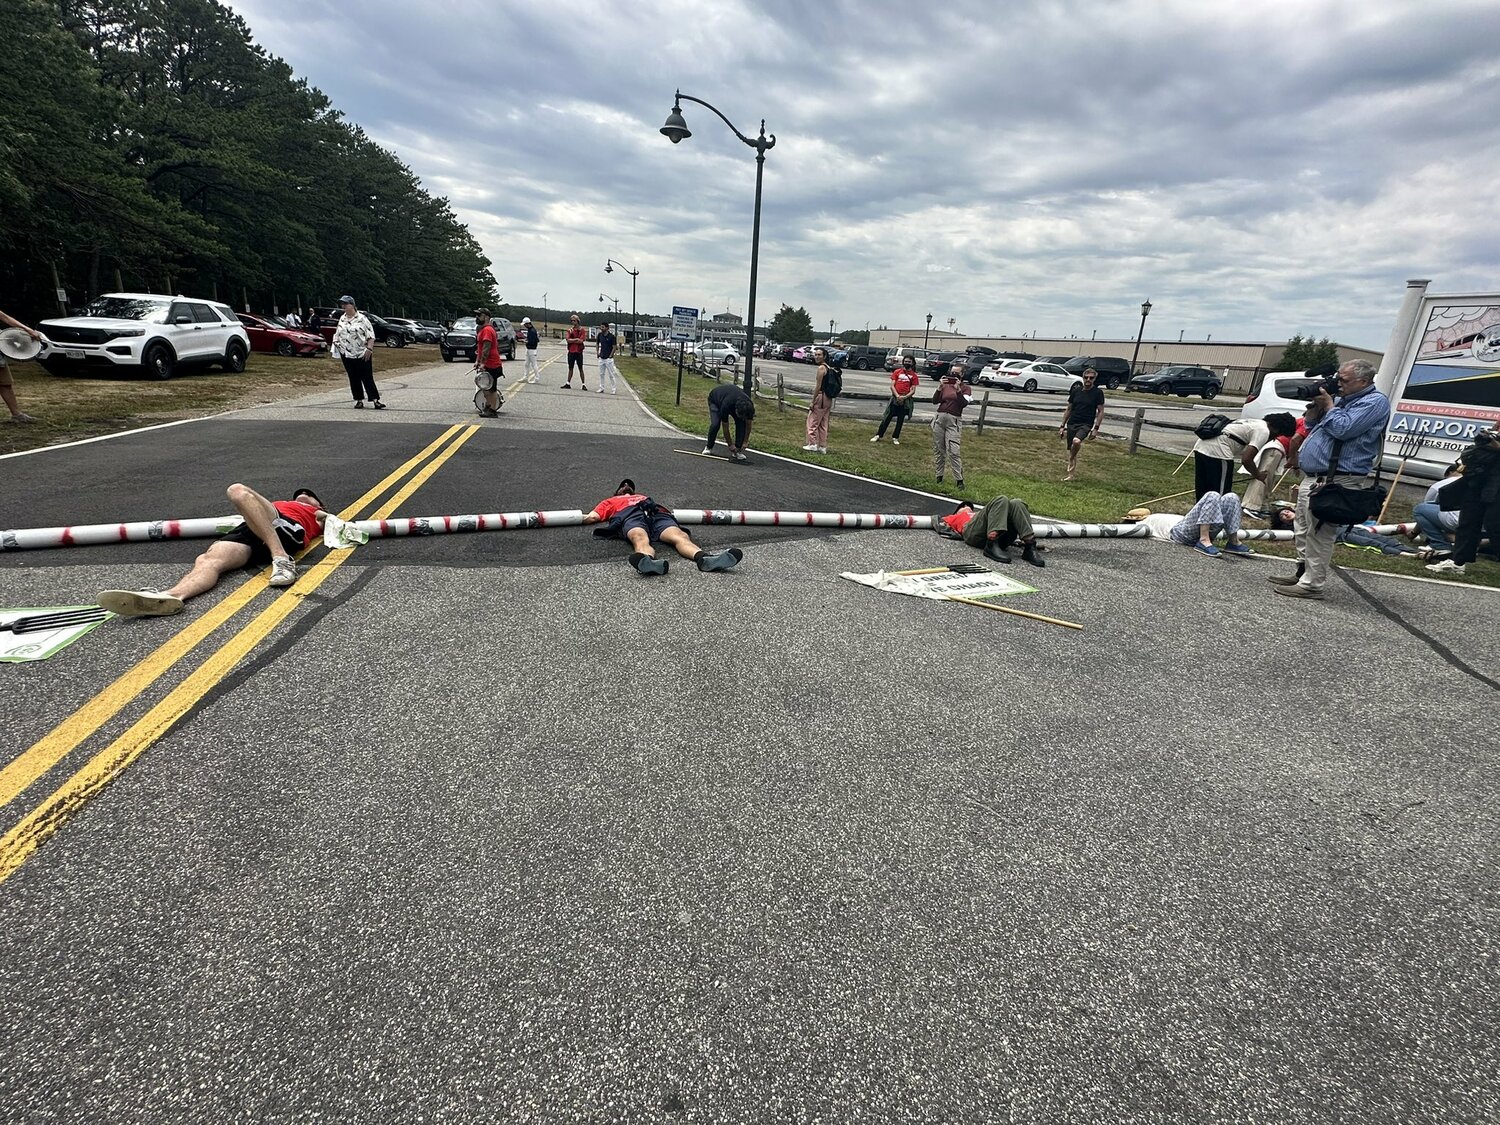 Protesters attempted to block access to East Hampton Airport on Friday afternoon, to protest the outsized contribution that private aircraft usage has on climate change. 
MARGARET KLEIN